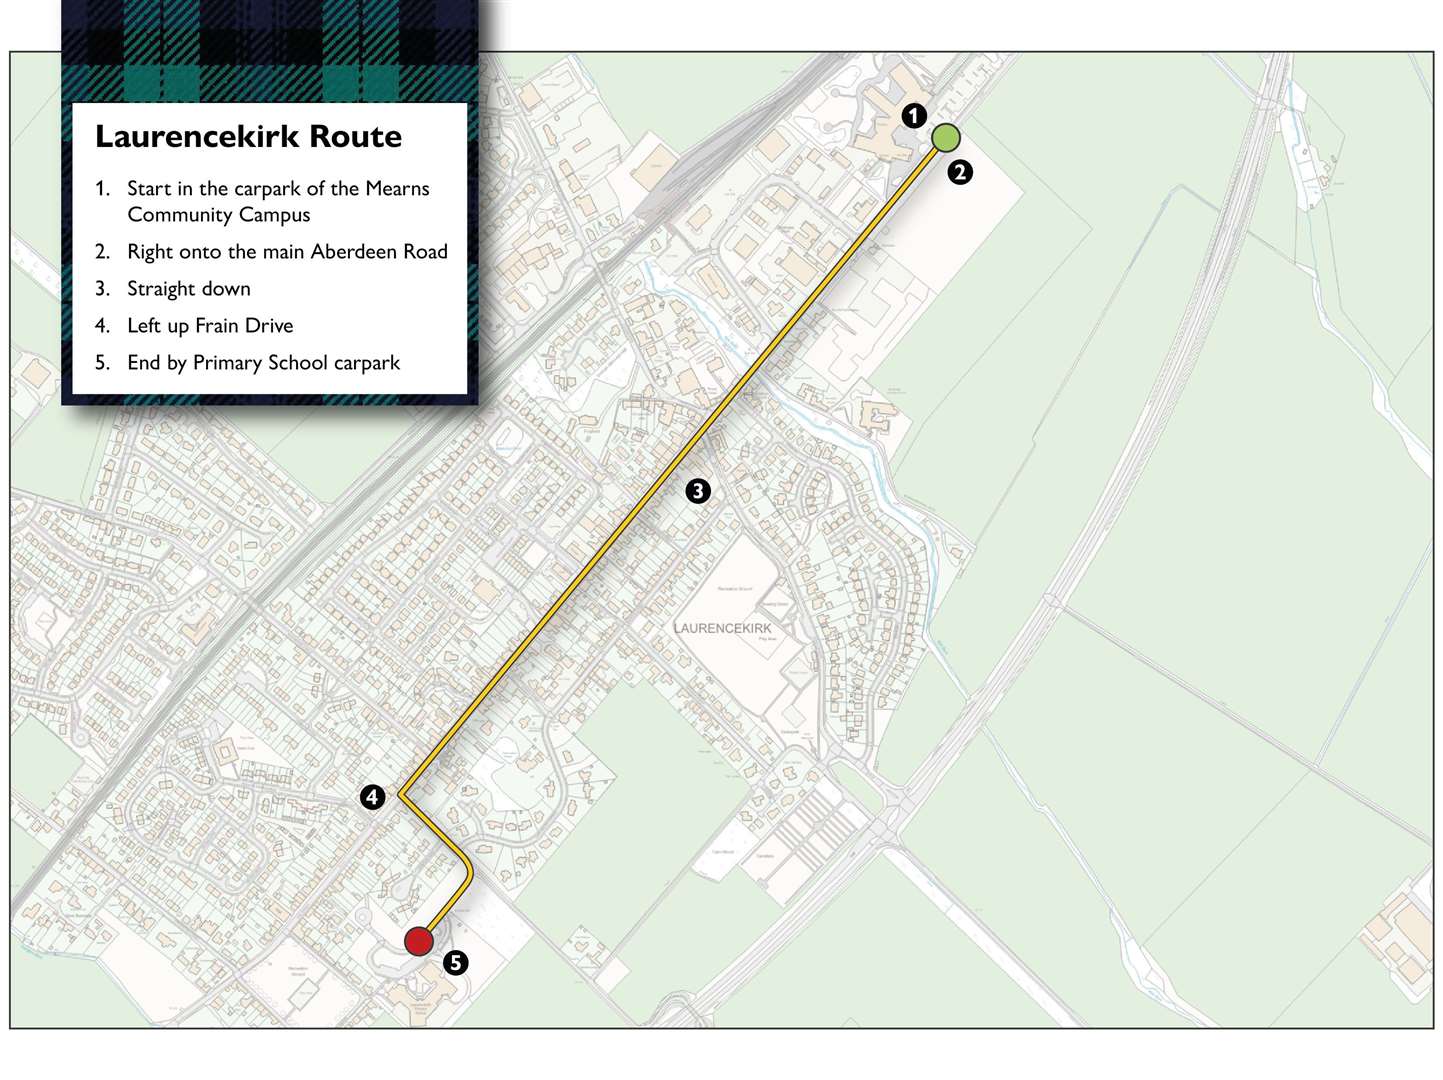 The Laurencekirk parade route